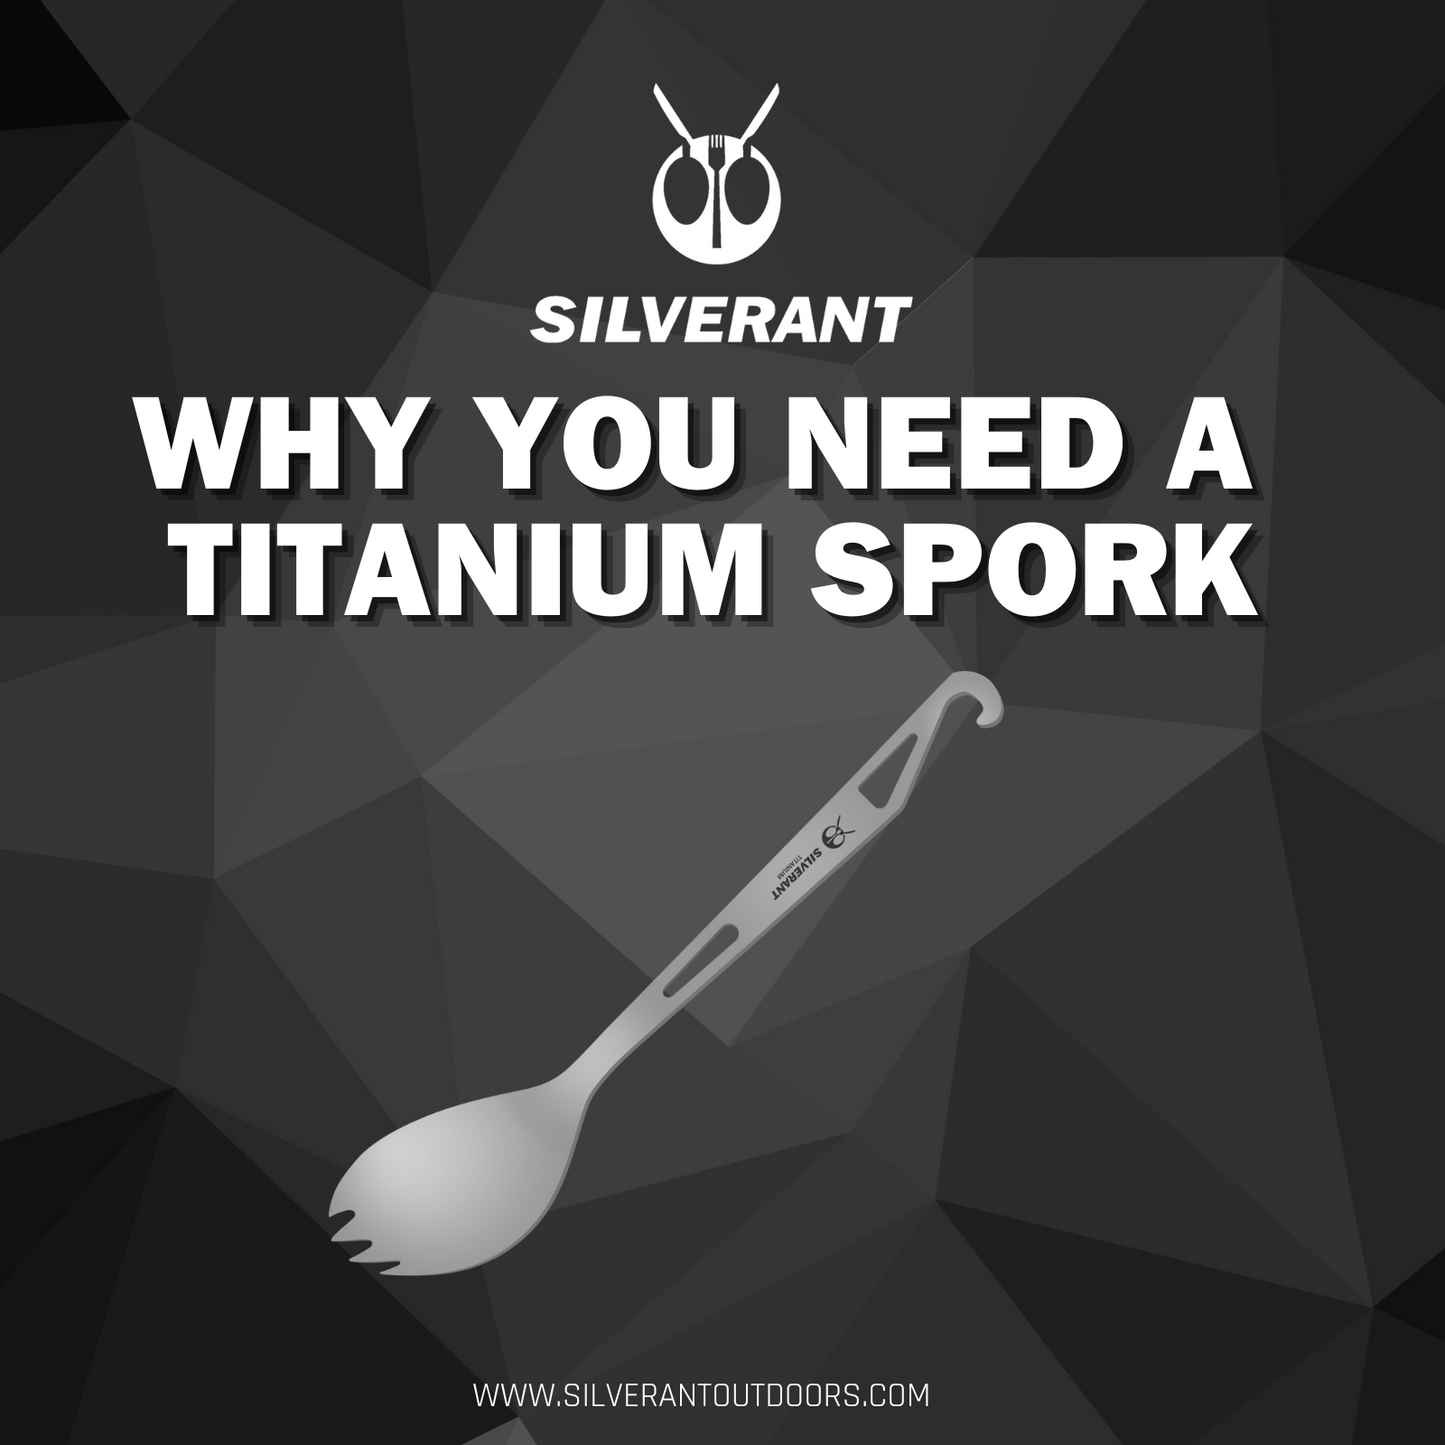 Why you need a titanium spork blog banner image